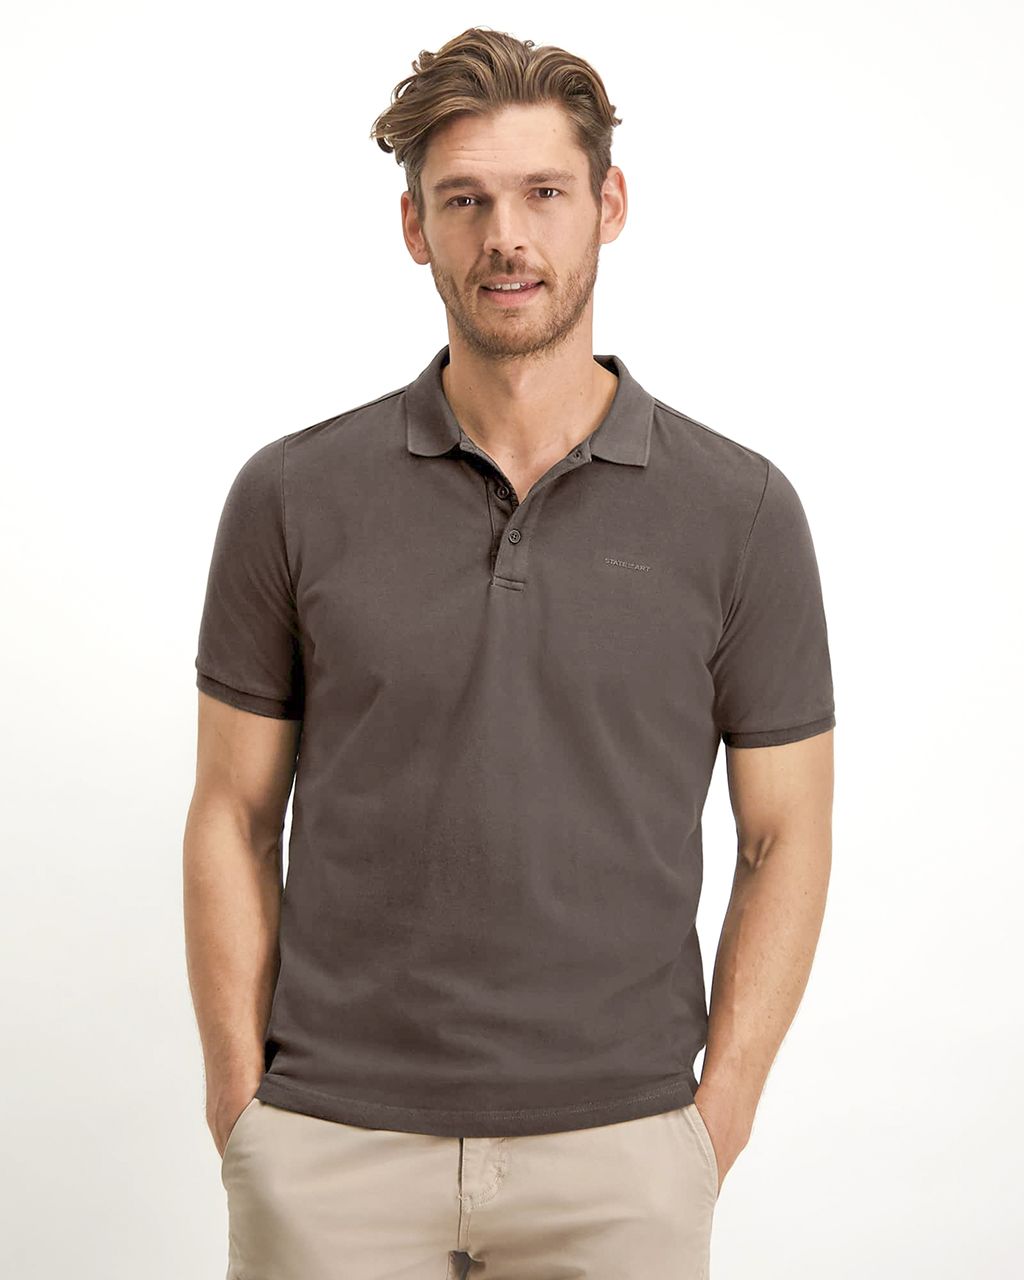 State of Art Polo KM Donker bruin 075973-001-4XL